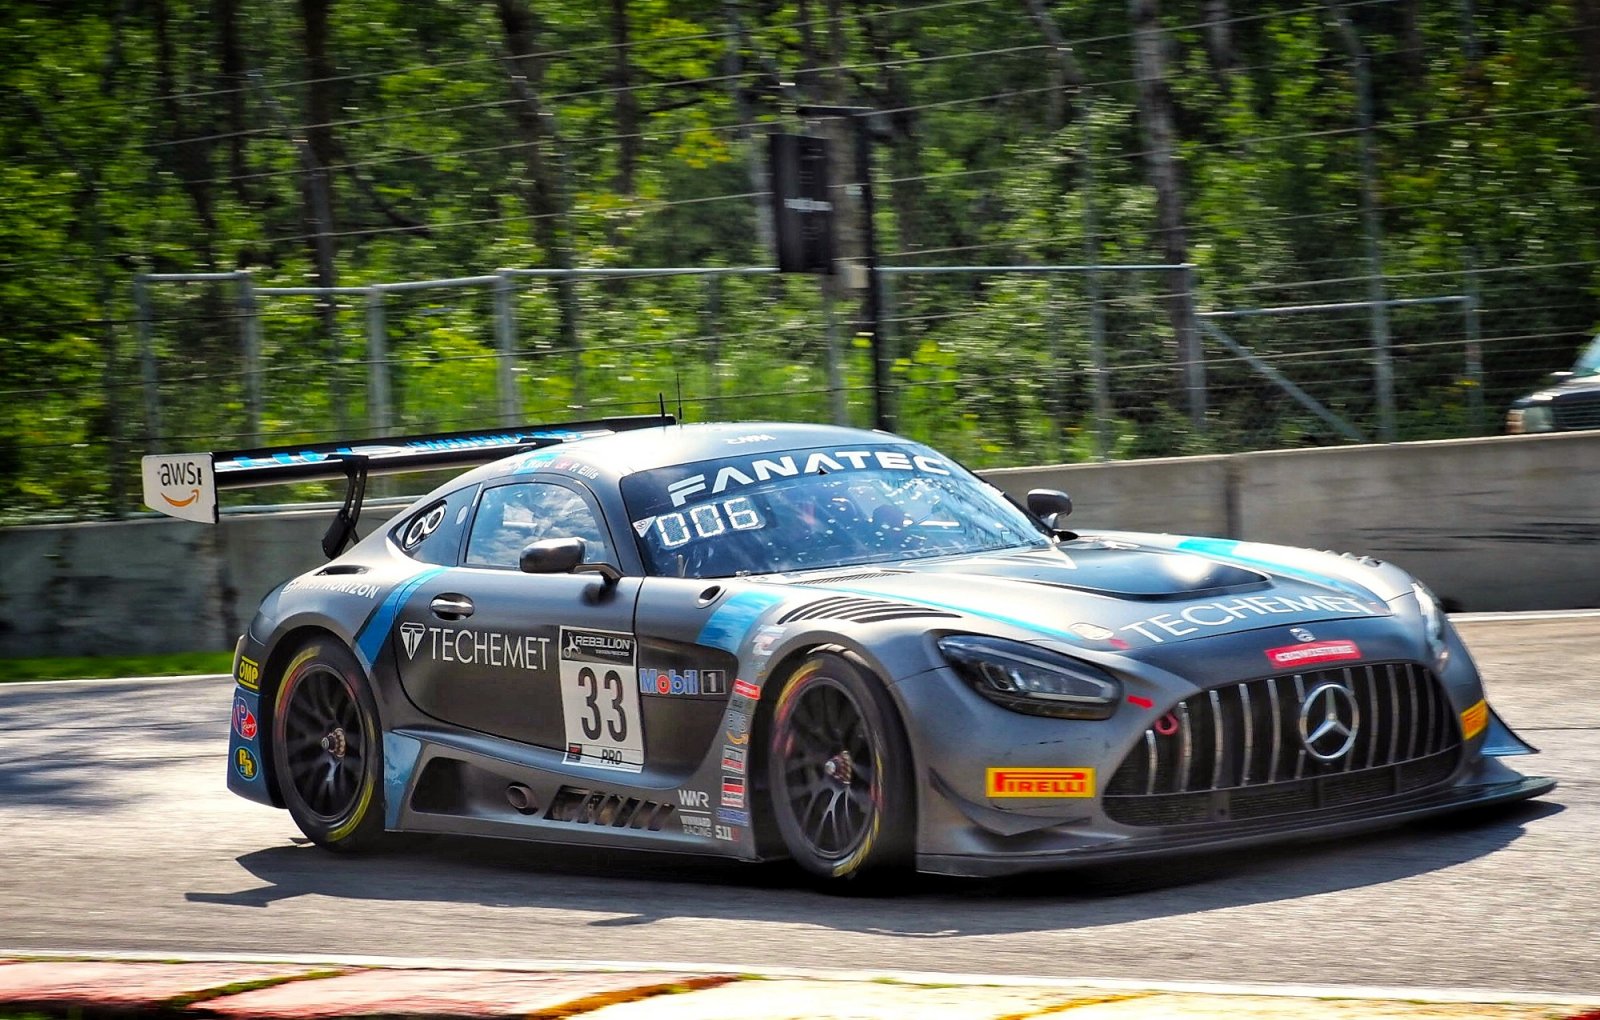 Mercedes-AMG Fastest in Pro and Pro-Am, Ferrari Tops Am In Friday Afternoon Practice at Road America